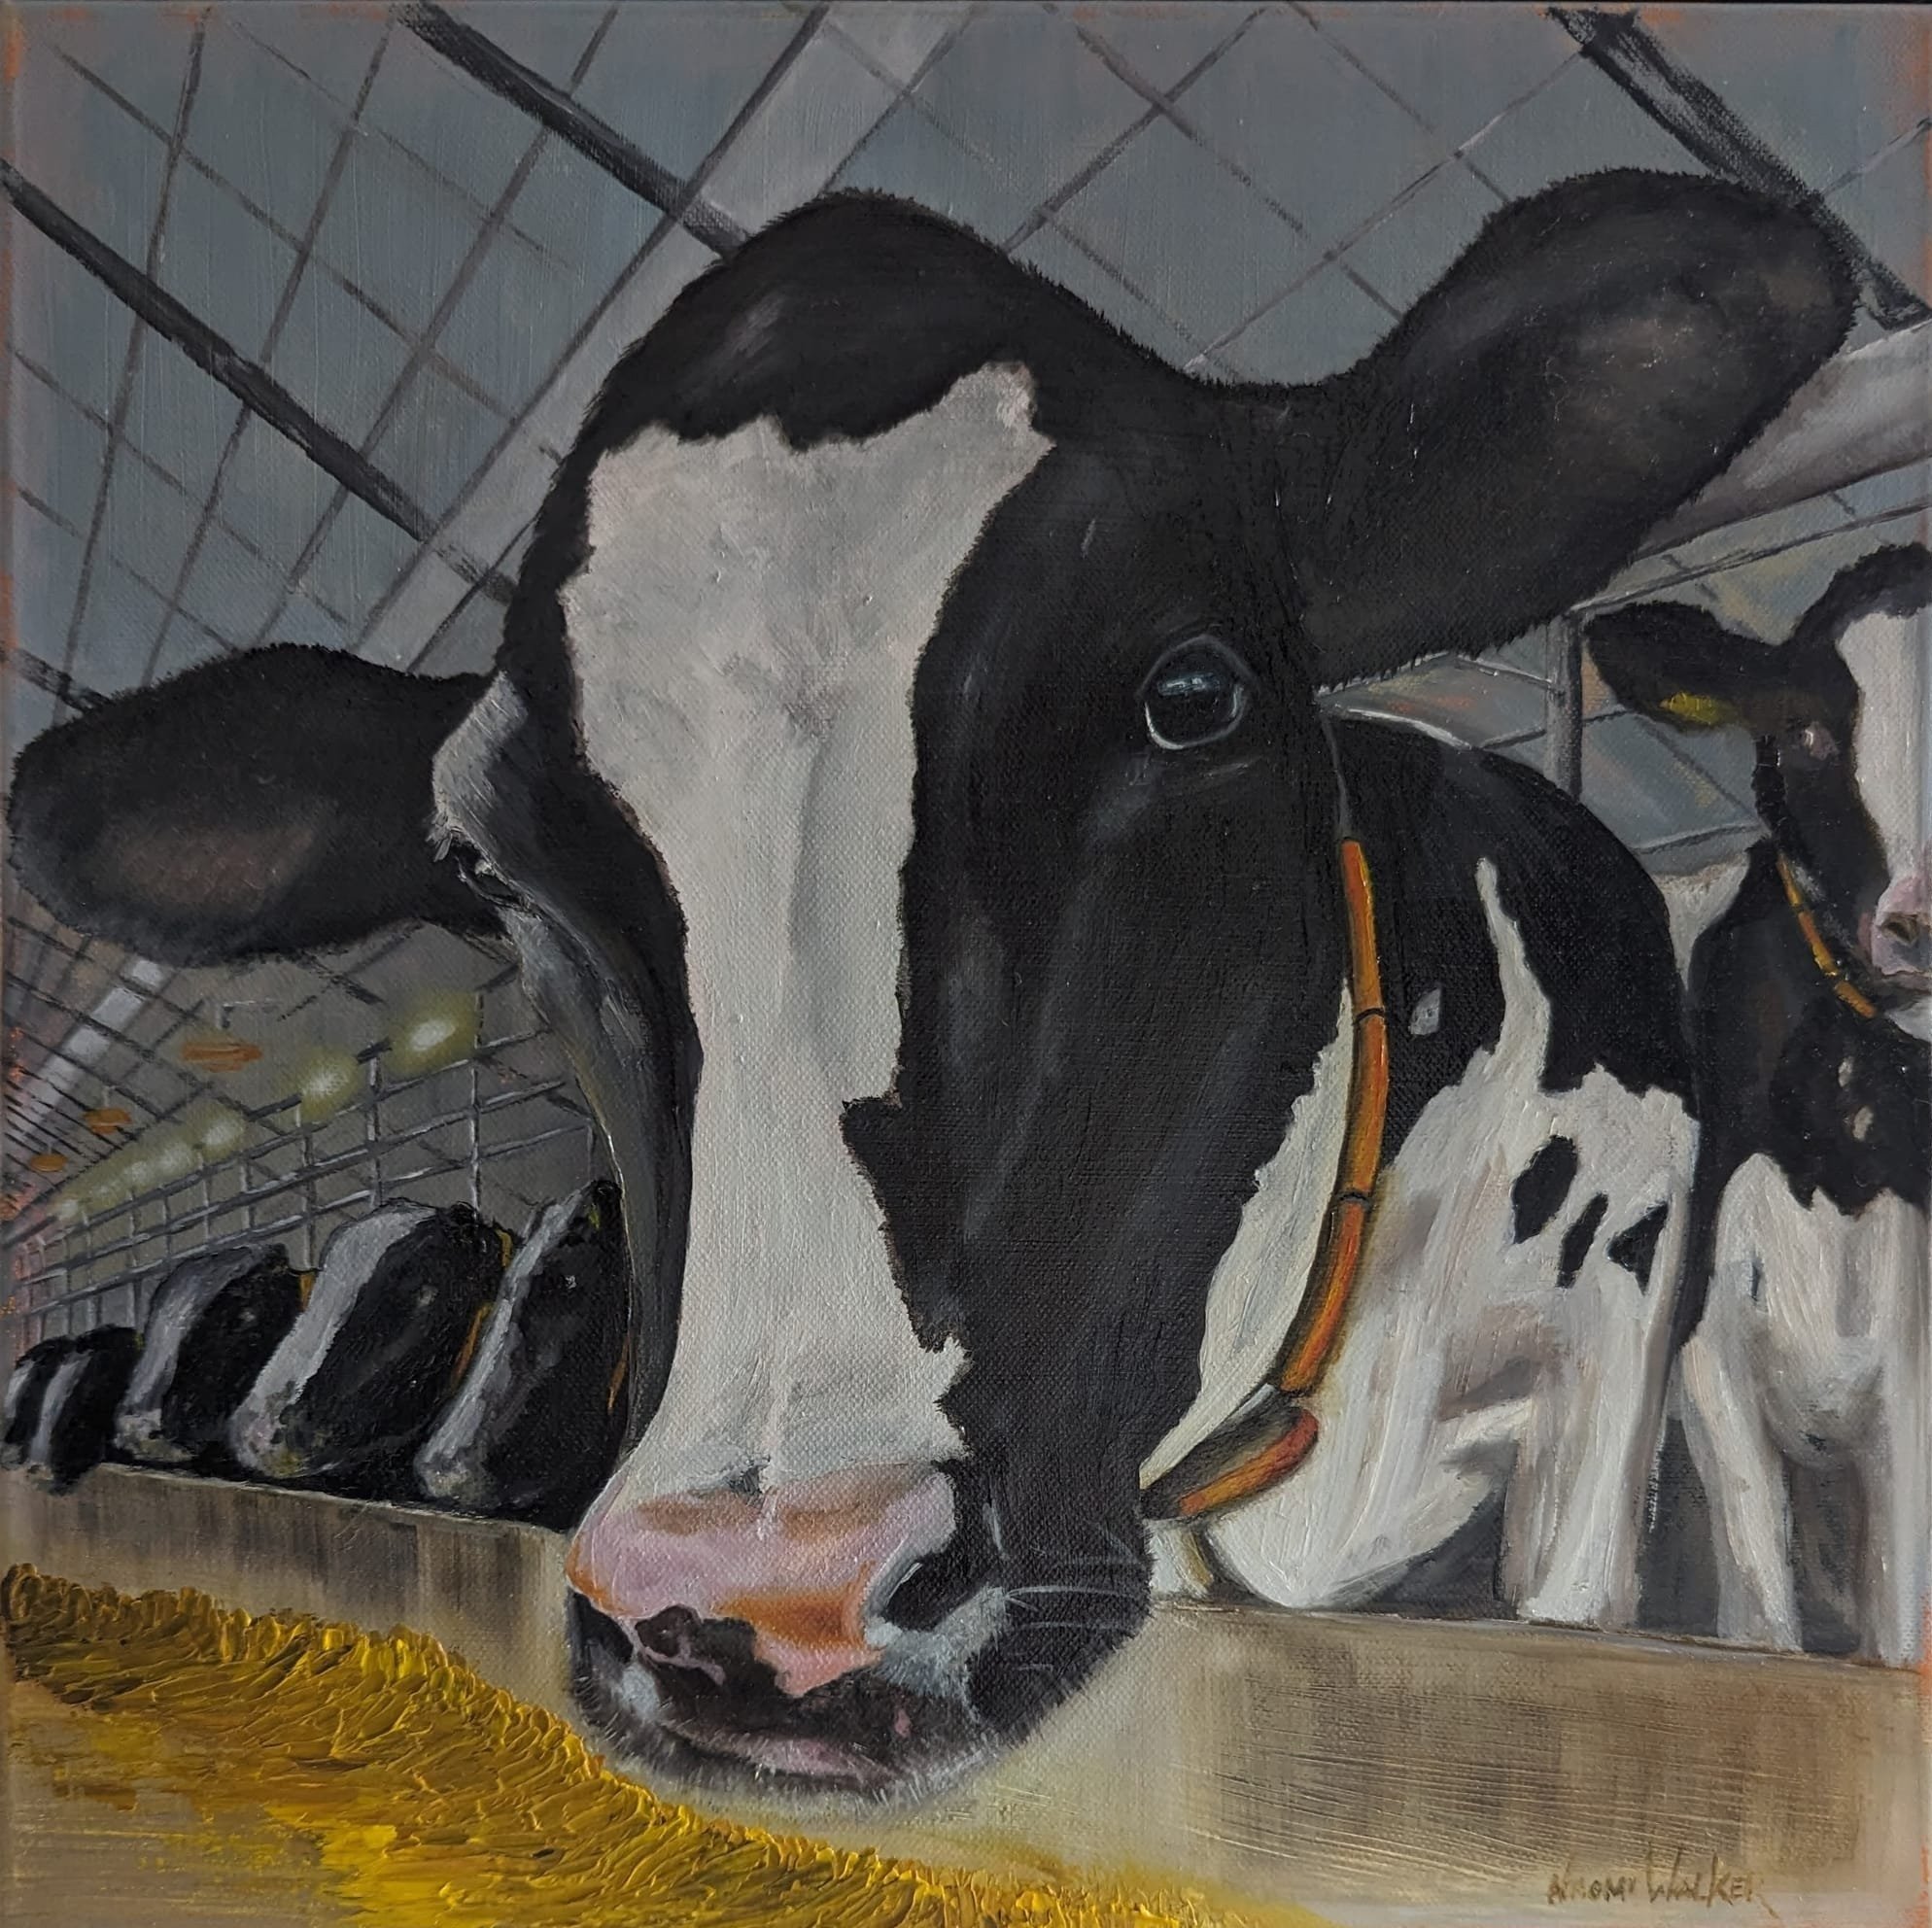 Dairy Barn Inside: Over 25 Royalty-Free Licensable Stock Illustrations &  Drawings | Shutterstock